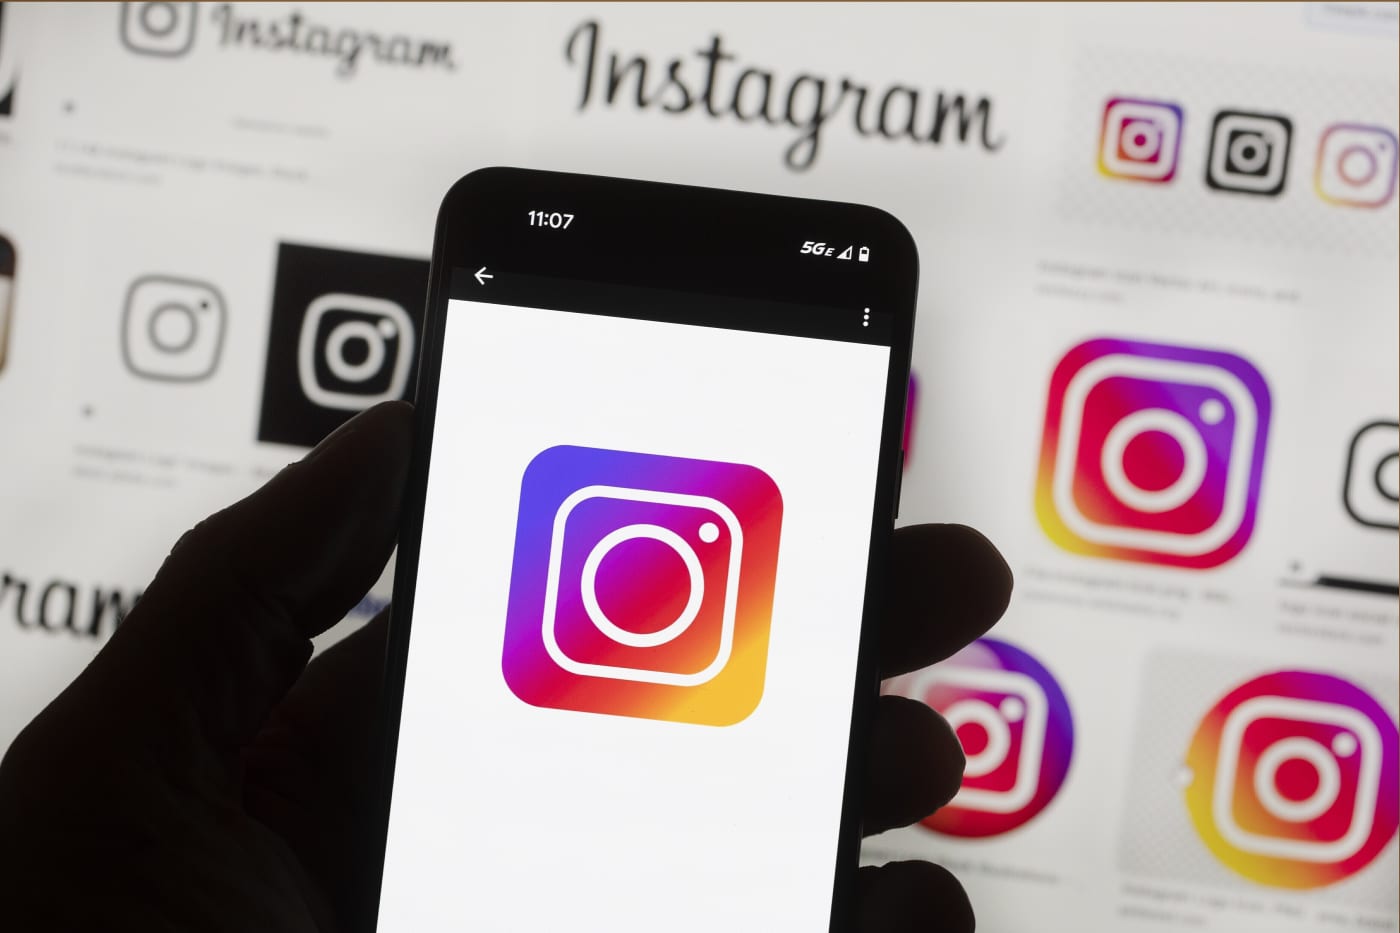 Instagram is working on new Reels feed that combines two users' interests